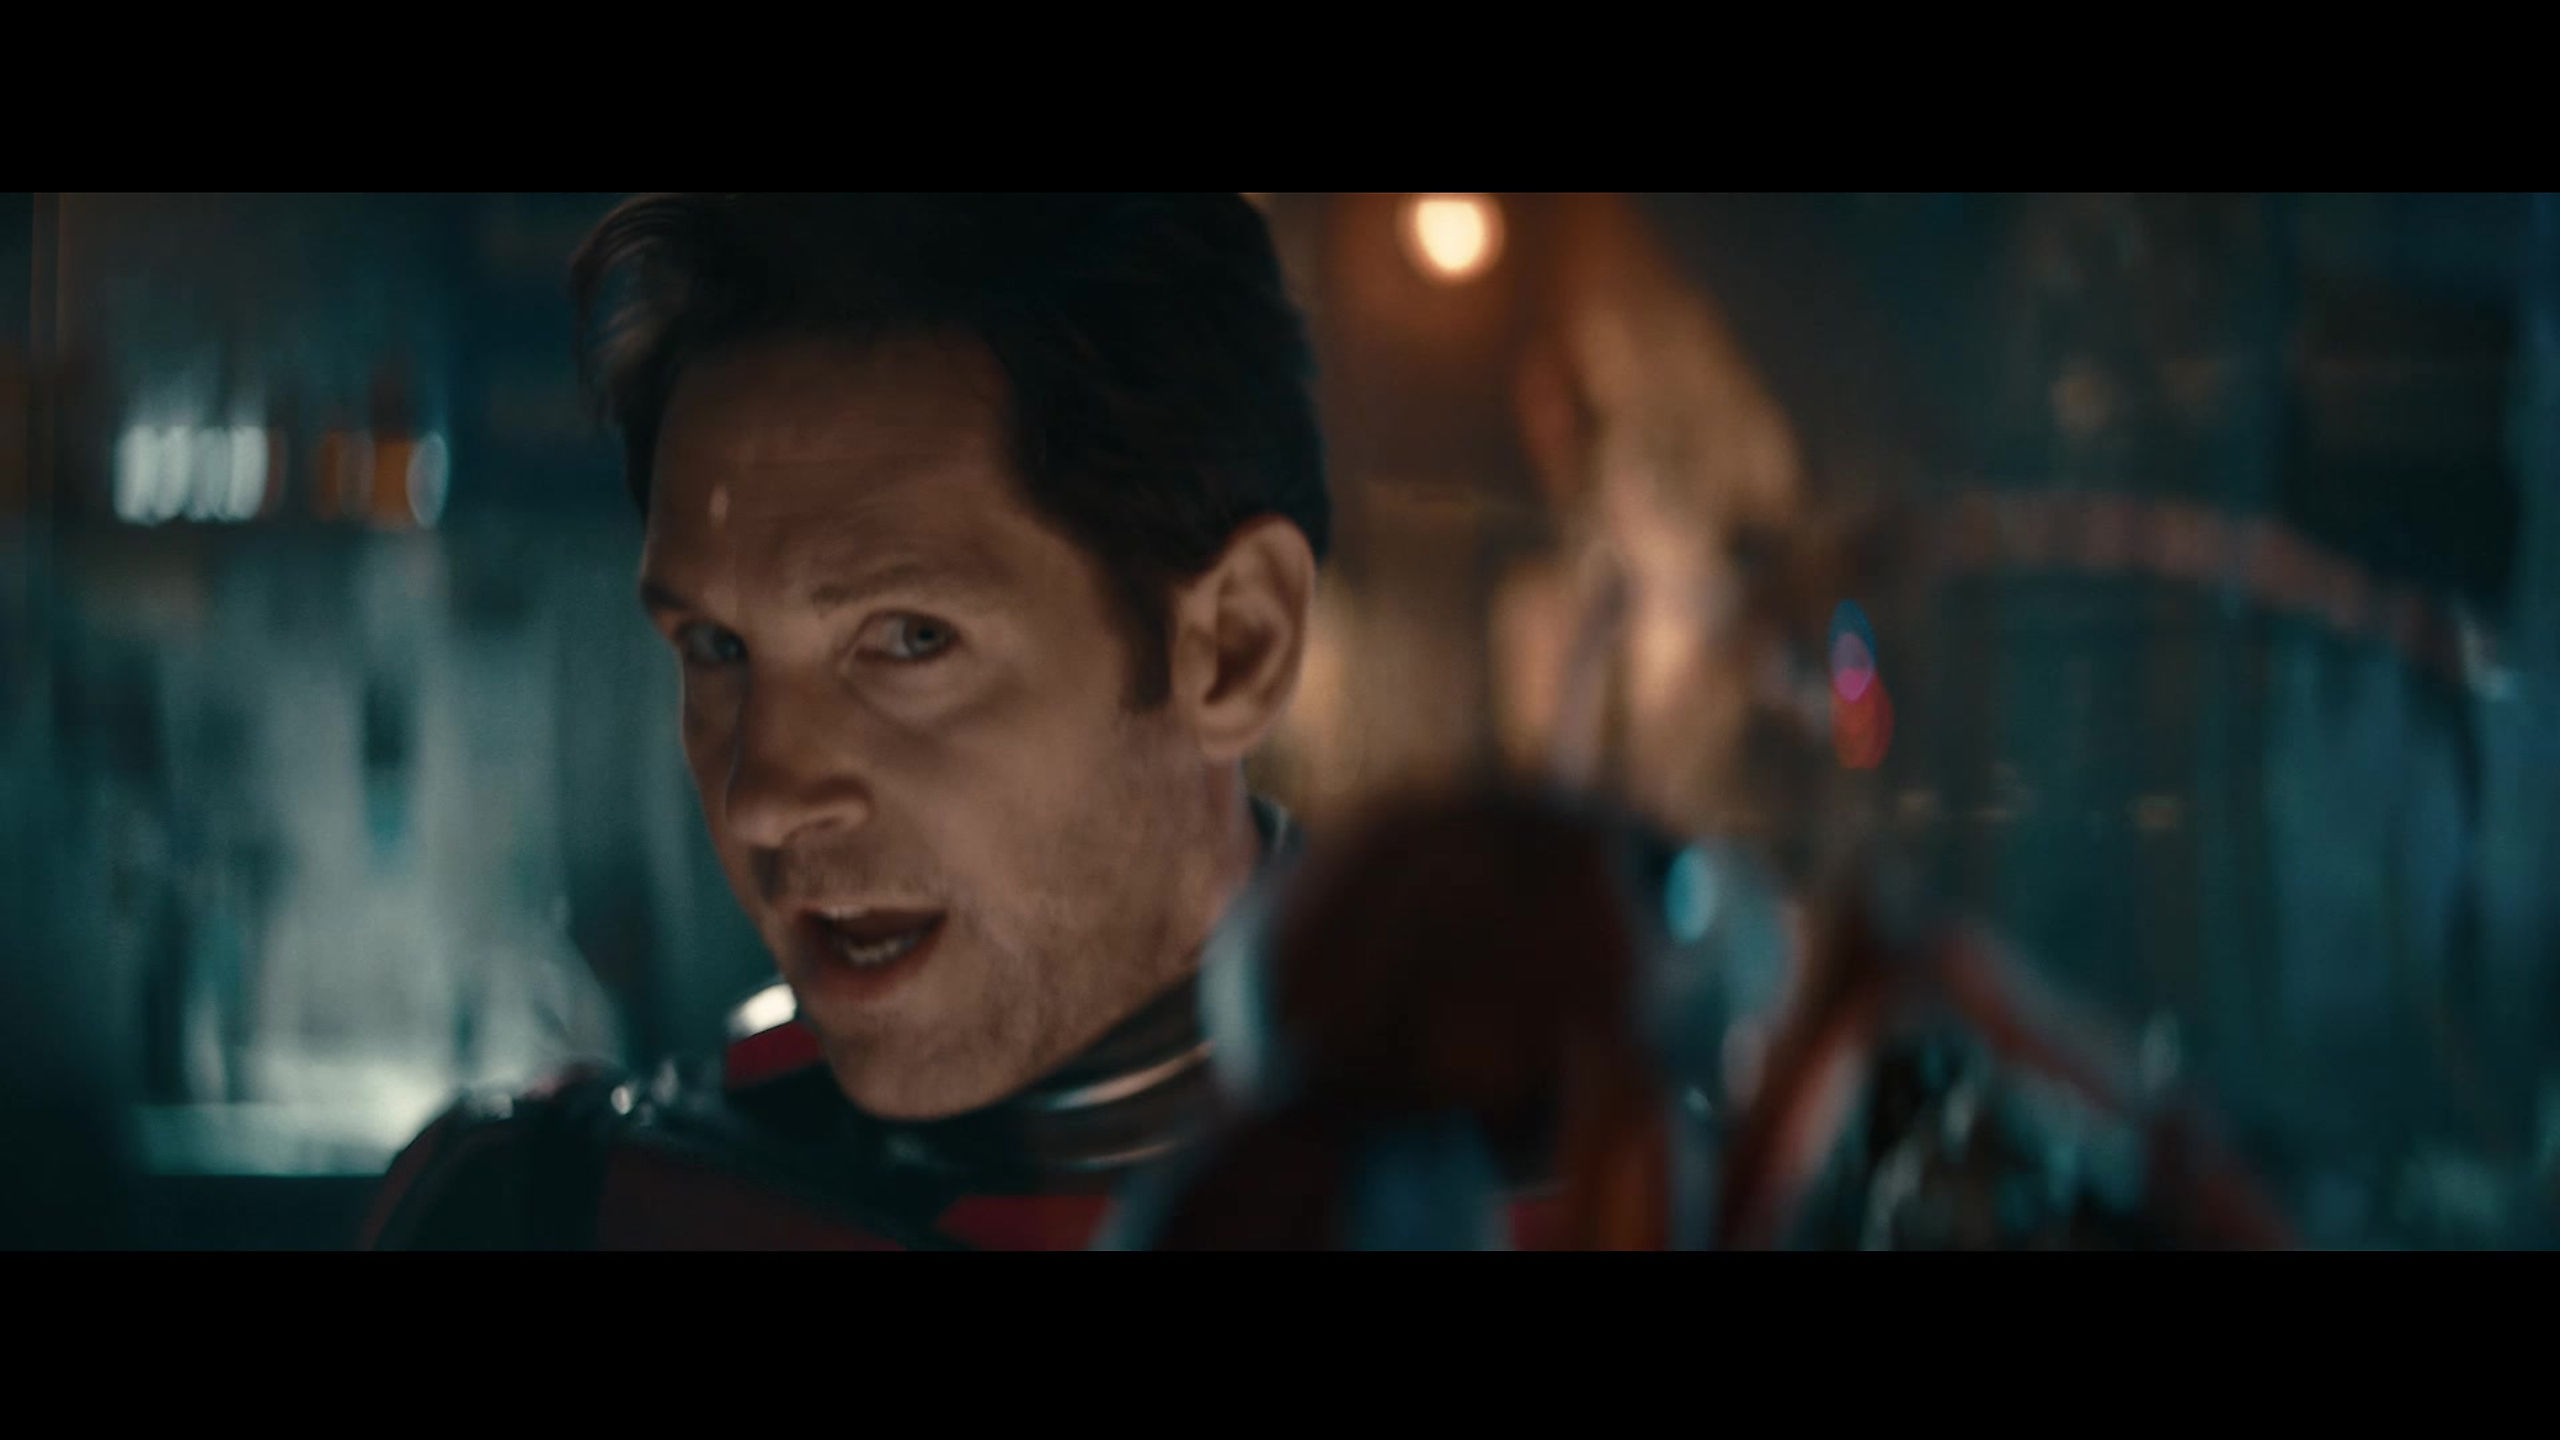 NFA_Heineken_00_Ant-Man_and_The_Wasp_Quantumania_No_Shrinking_and_Drinking_60_TV_EN_IT_16x9_30FPS